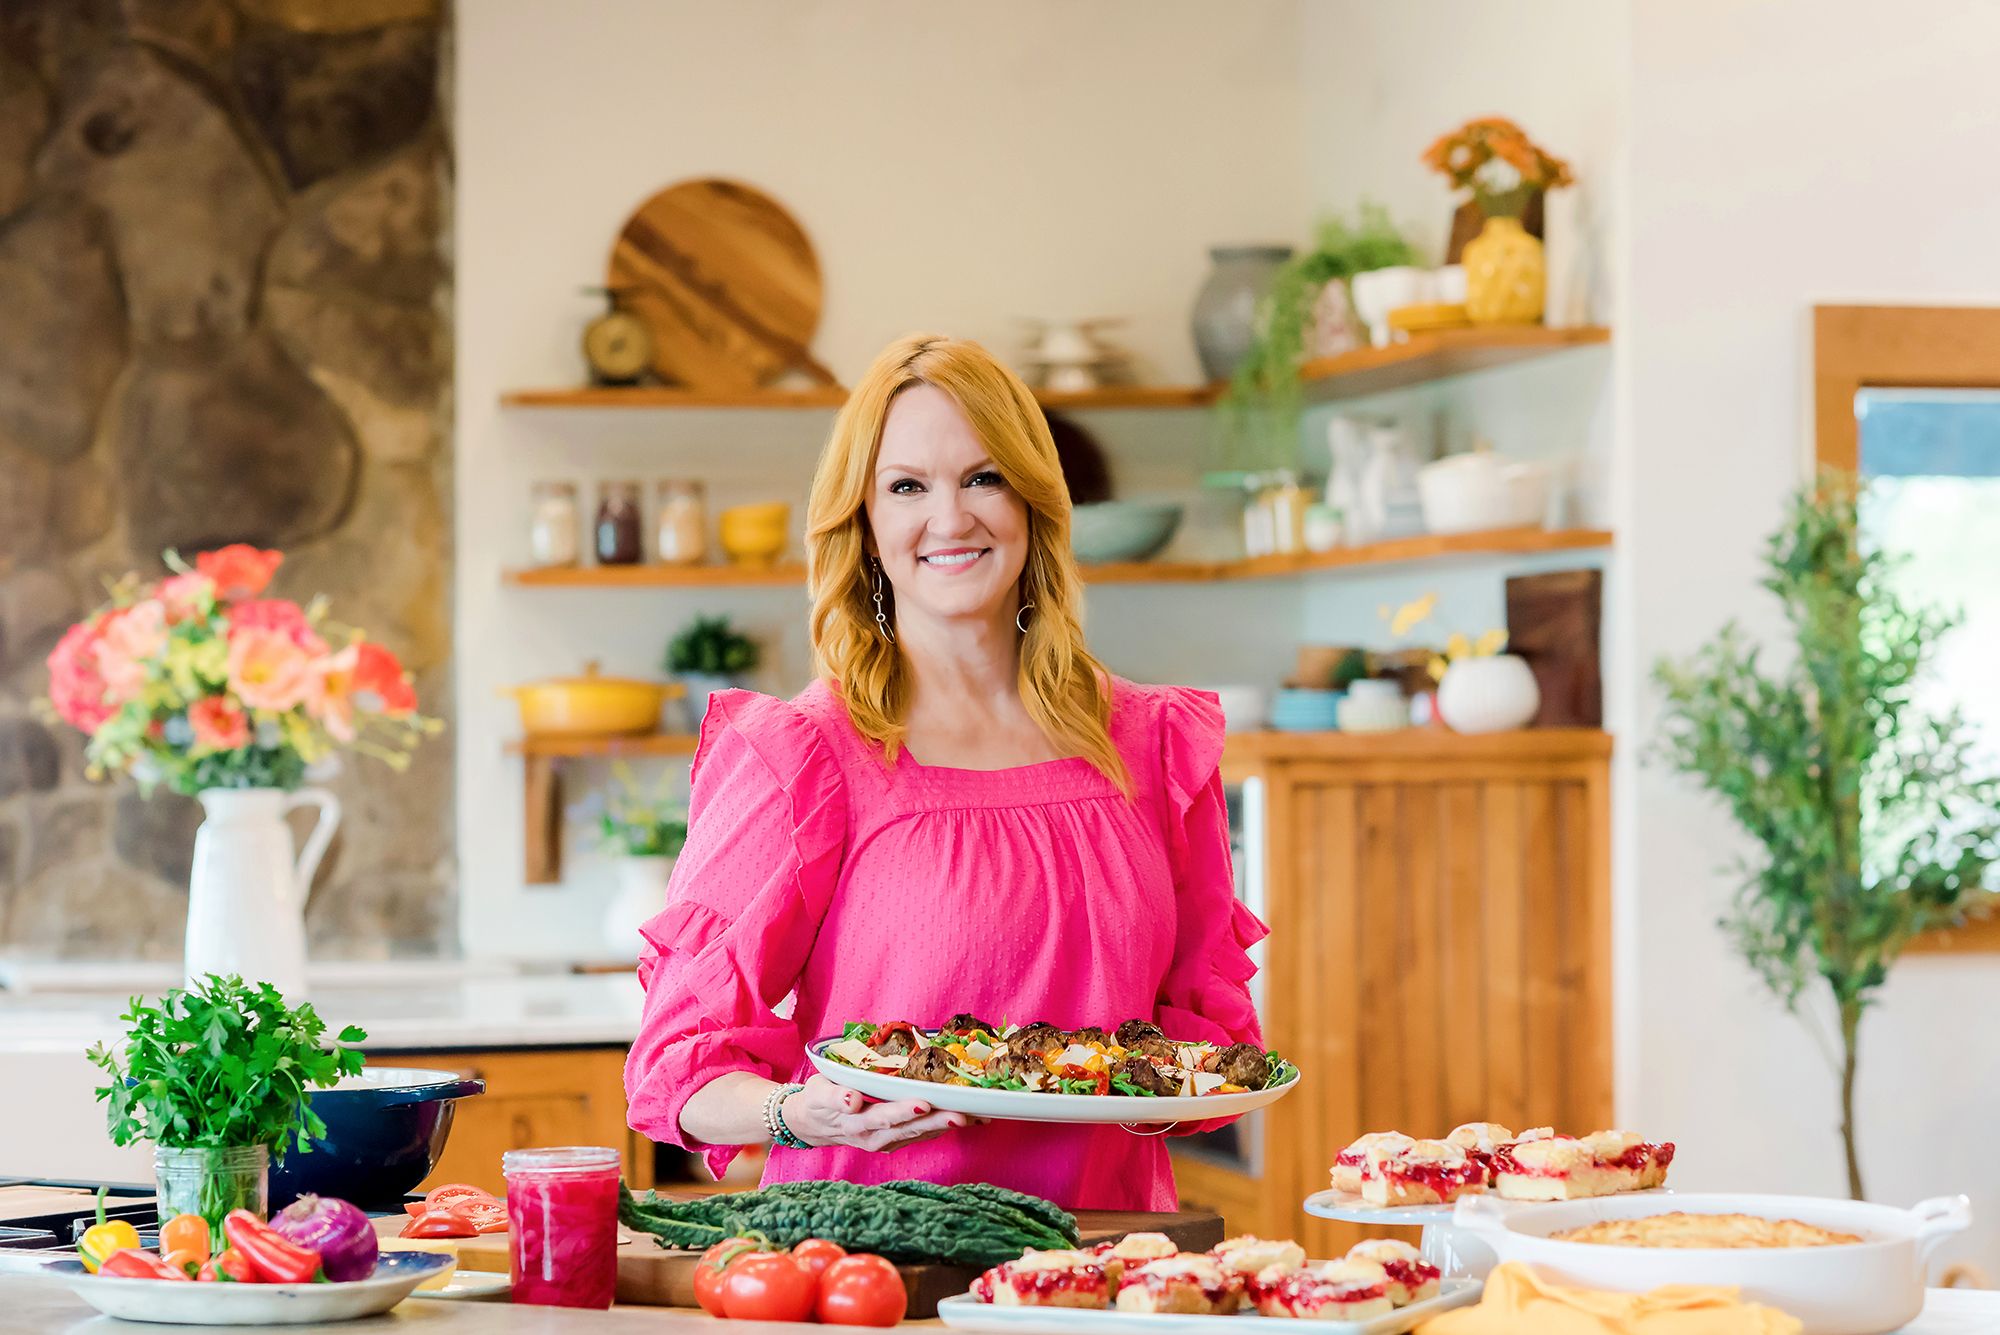 Ree Drummond Launches Her New Cookbook, Dinner's Ready!